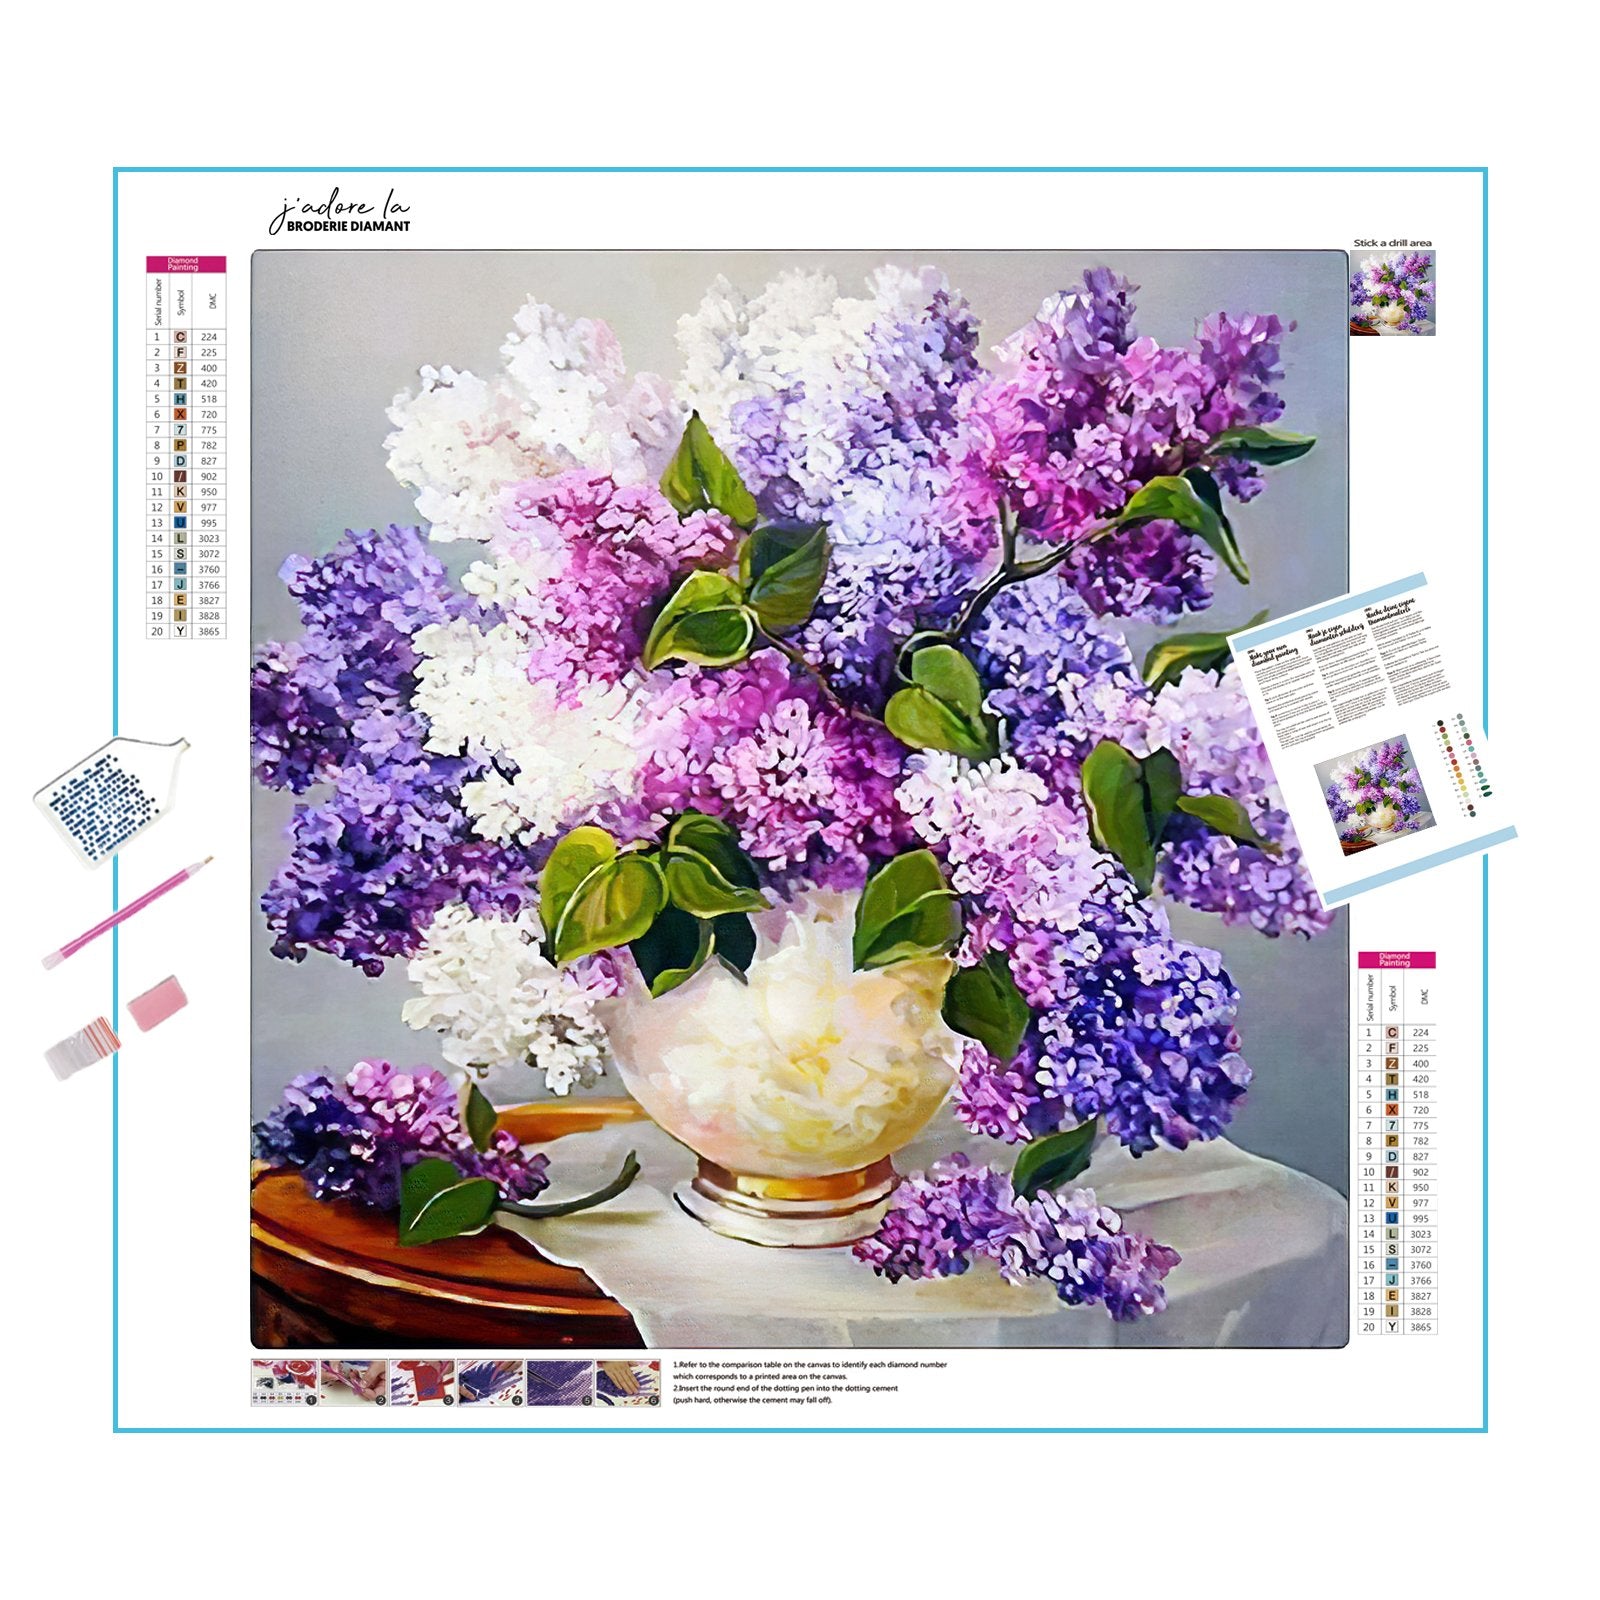 A bouquet of lavender, evoking the serene beauty and fragrance of the countryside. Bouquet Of Lavande - Diamondartlove